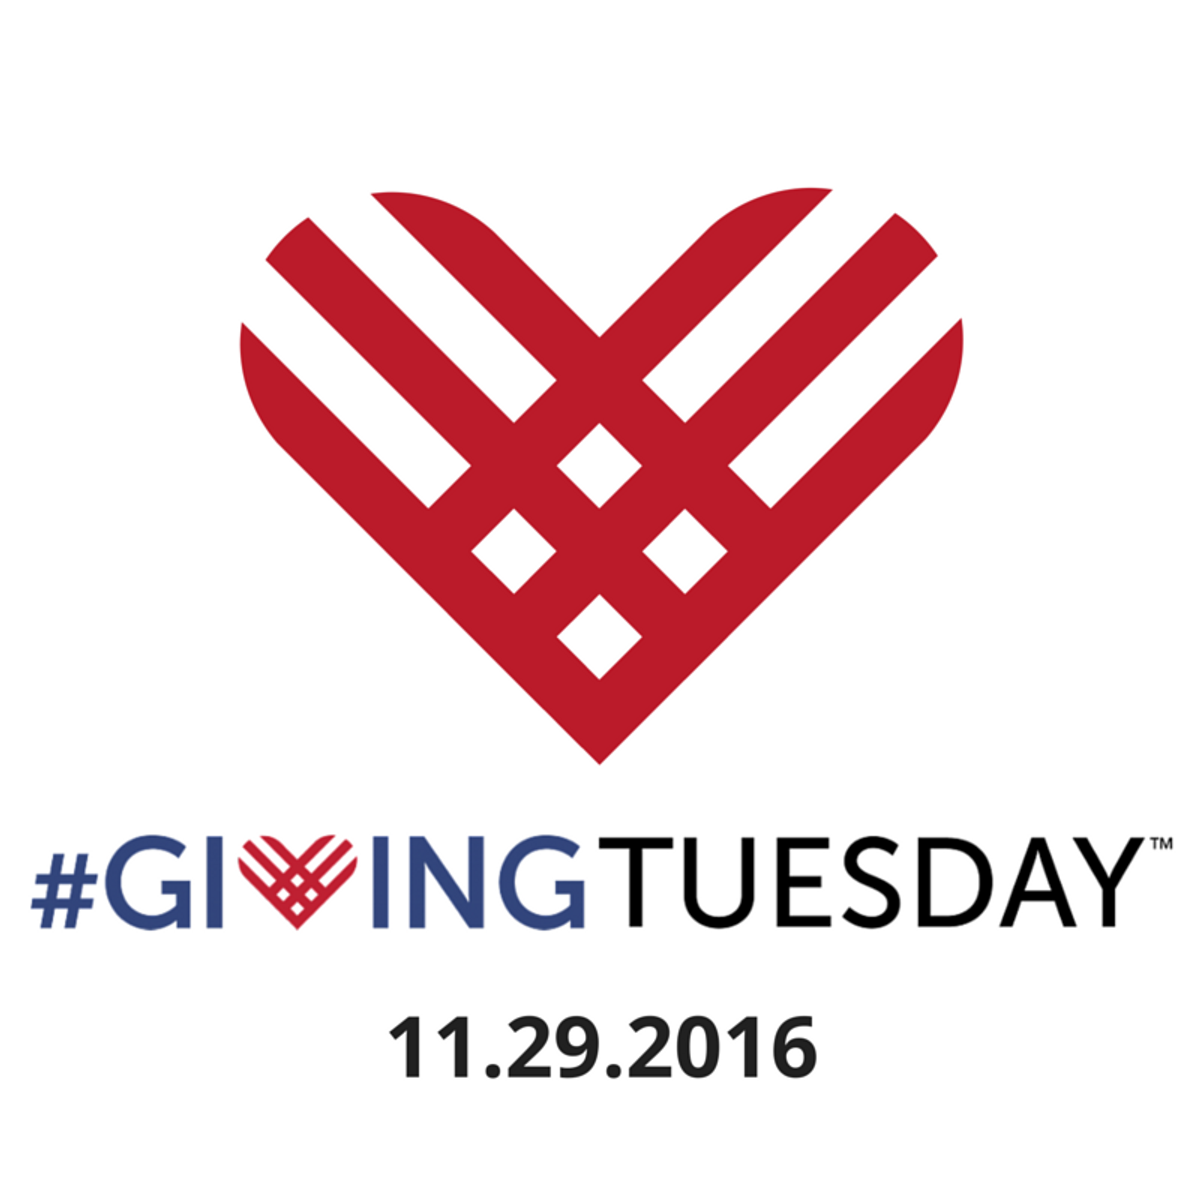 #GivingTuesday: How To Do Your Part